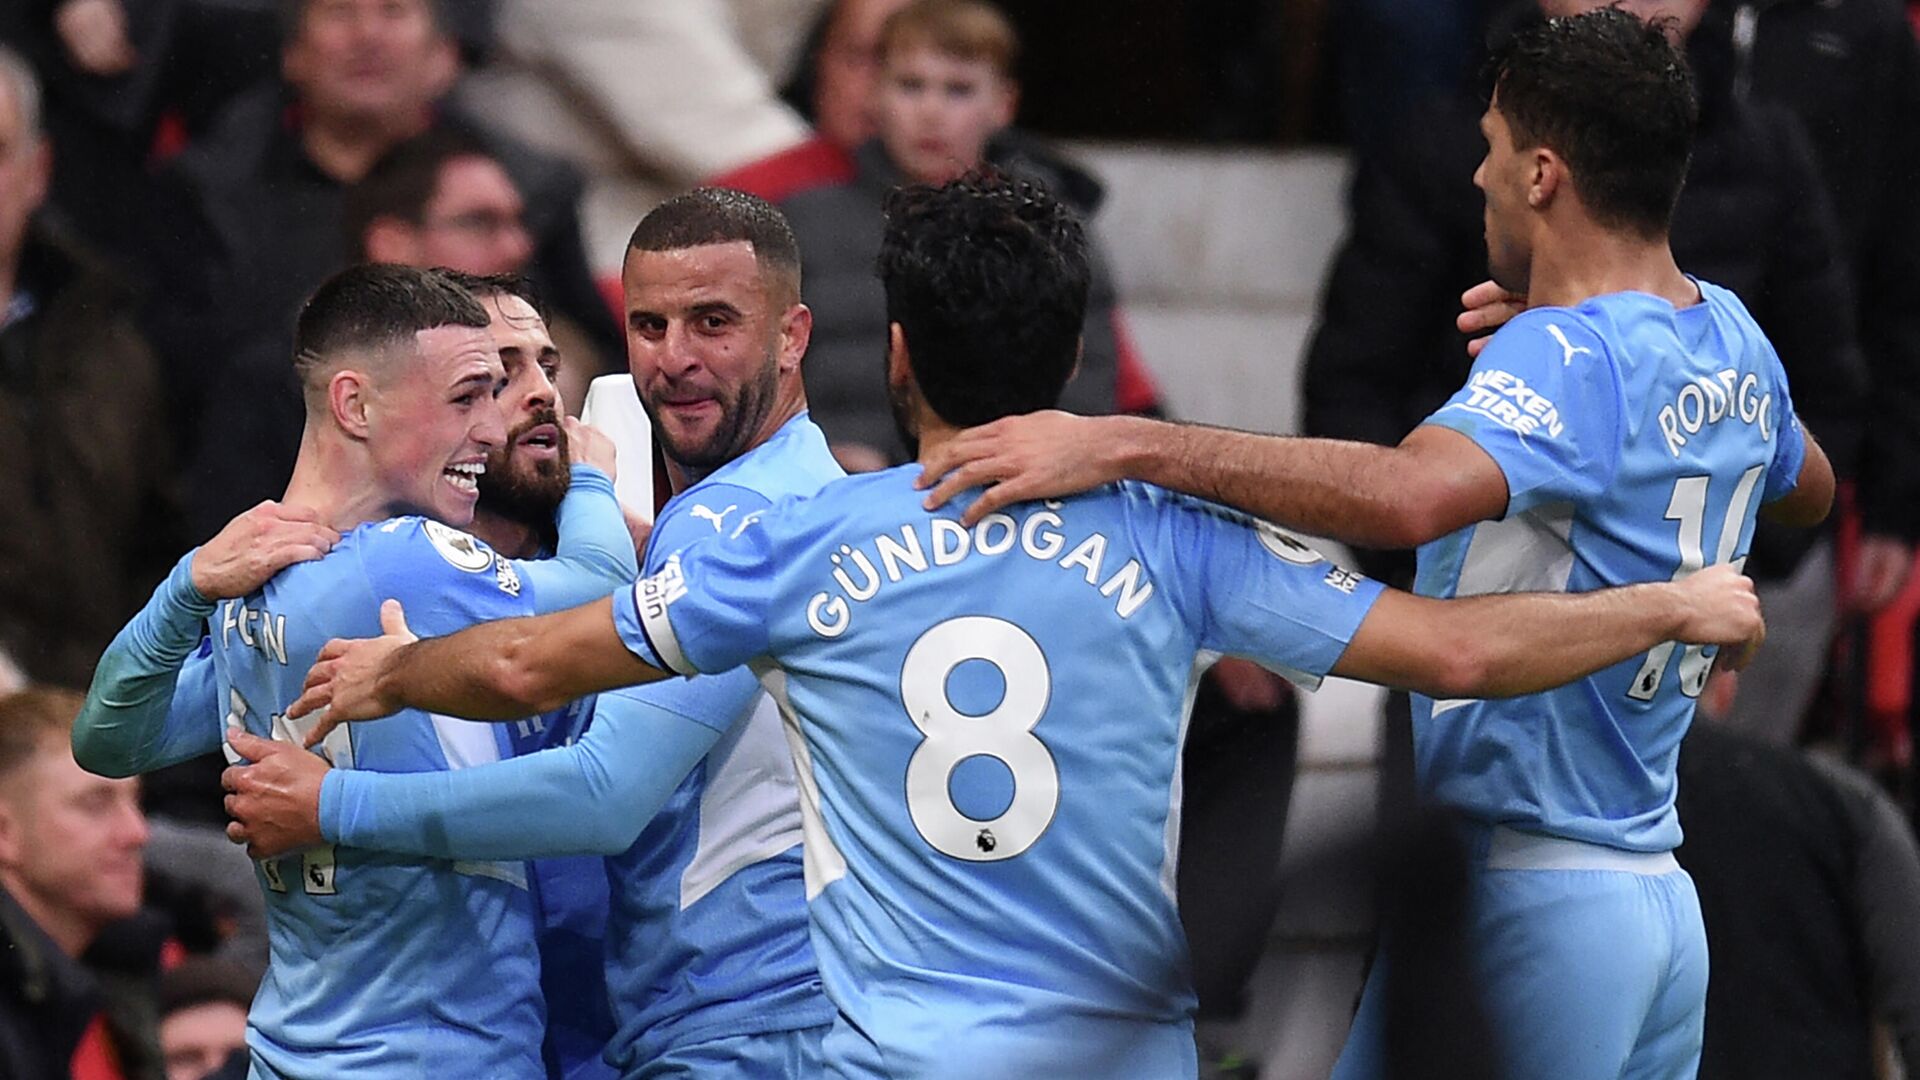 Manchester City's Portuguese midfielder Bernardo Silva (2L) celebrates scoring his team's second goal with teammates during the English Premier League football match between Manchester United and Manchester City at Old Trafford in Manchester, north west England, on November 6, 2021. (Photo by Oli SCARFF / AFP) / RESTRICTED TO EDITORIAL USE. No use with unauthorized audio, video, data, fixture lists, club/league logos or 'live' services. Online in-match use limited to 120 images. An additional 40 images may be used in extra time. No video emulation. Social media in-match use limited to 120 images. An additional 40 images may be used in extra time. No use in betting publications, games or single club/league/player publications. /  - РИА Новости, 1920, 06.11.2021